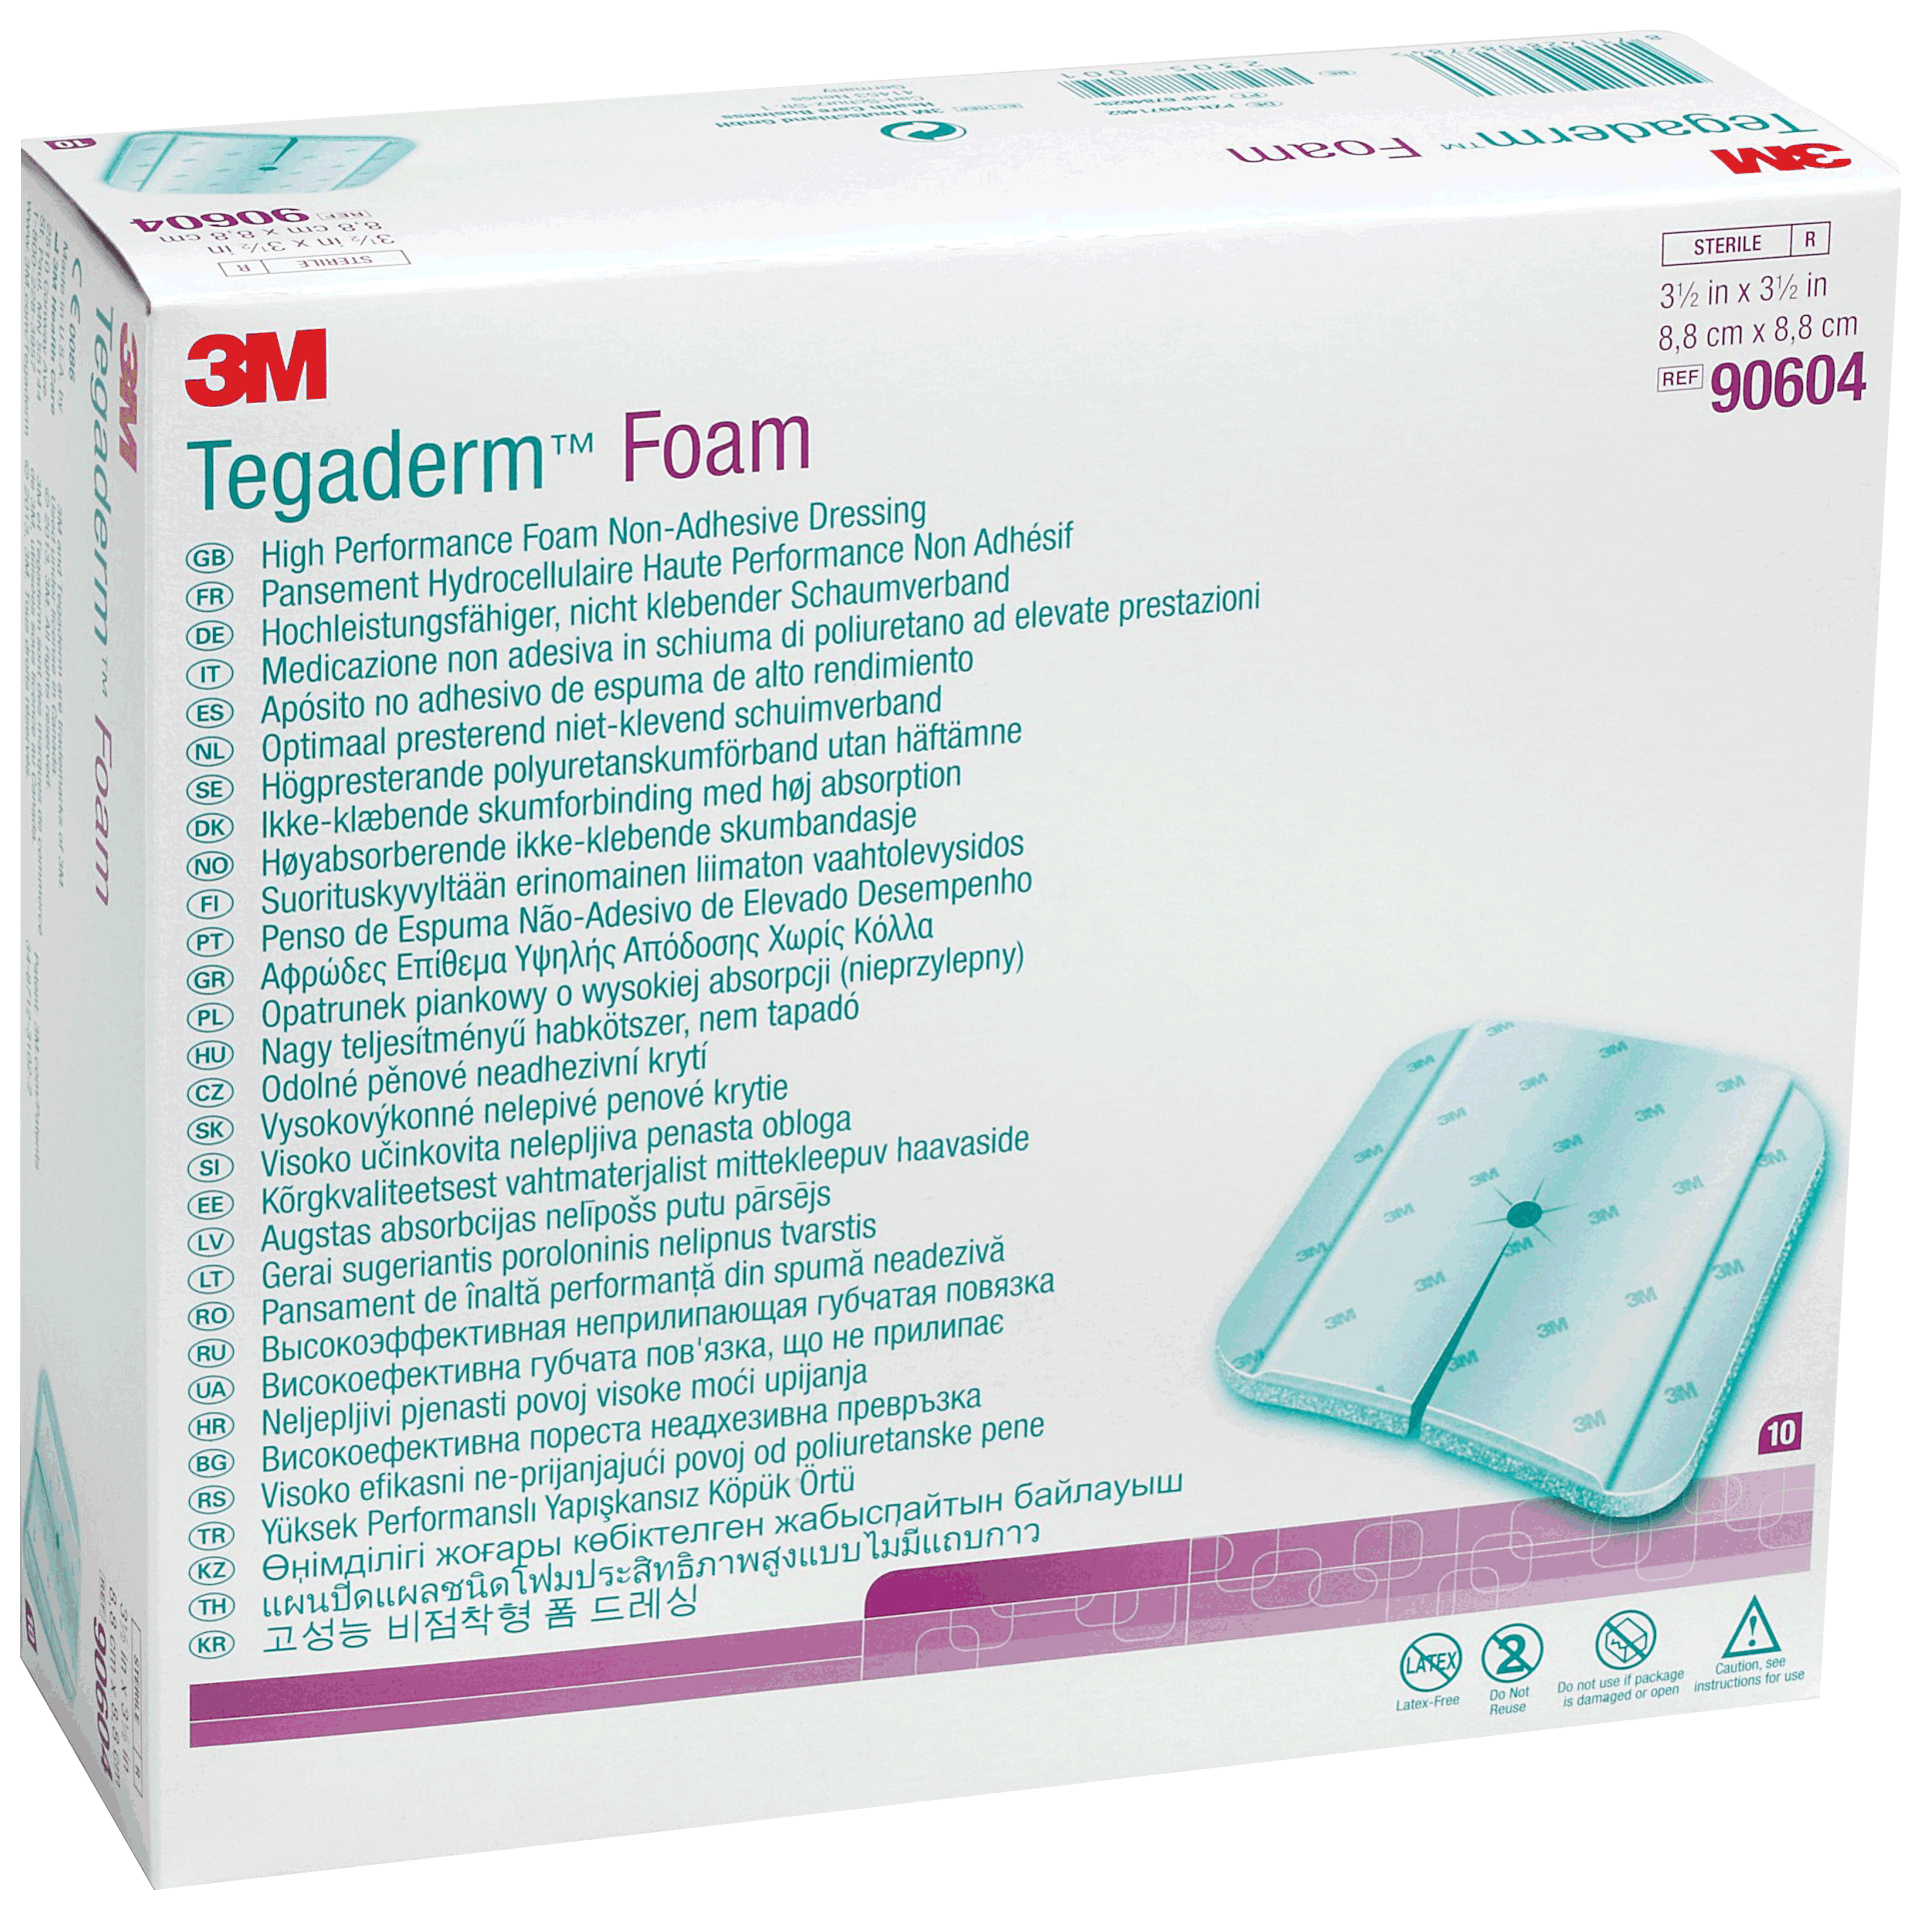 BX/5 - 3M Tegaderm&trade; Foam Dressing, Non-Adhesive, 4" x 8" - Best Buy Medical Supplies